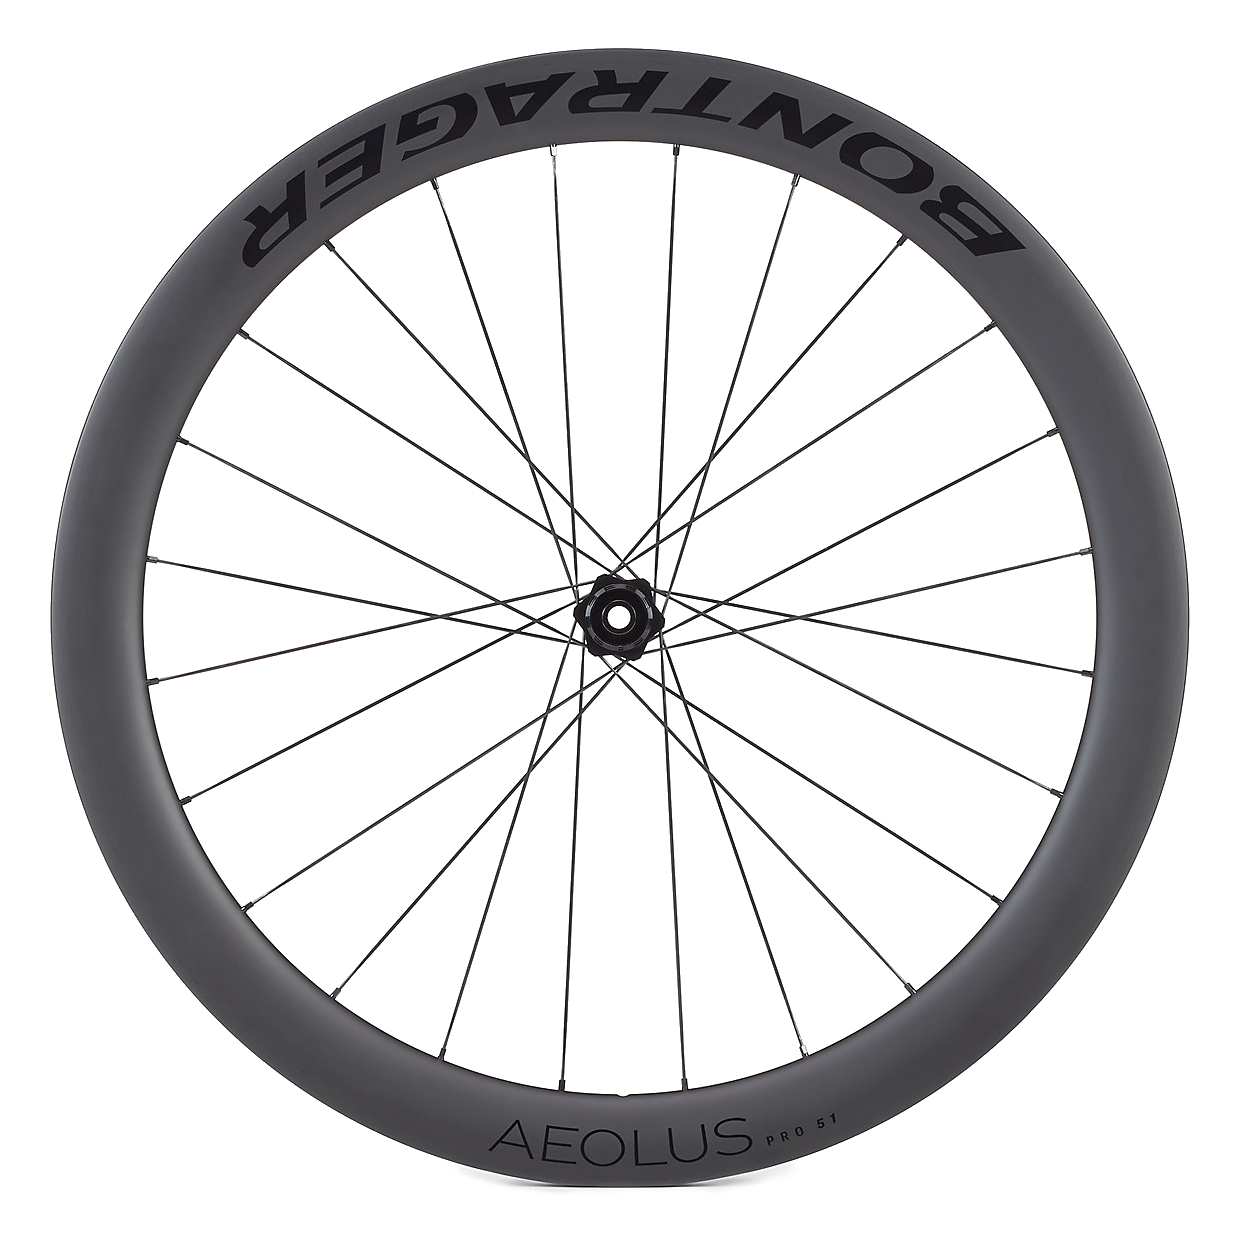 Picture of Bontrager Aeolus Pro 51 TLR Disc Carbon Rear Wheel - Clincher / Tubeless - Centerlock - 12x142mm - Shimano HG